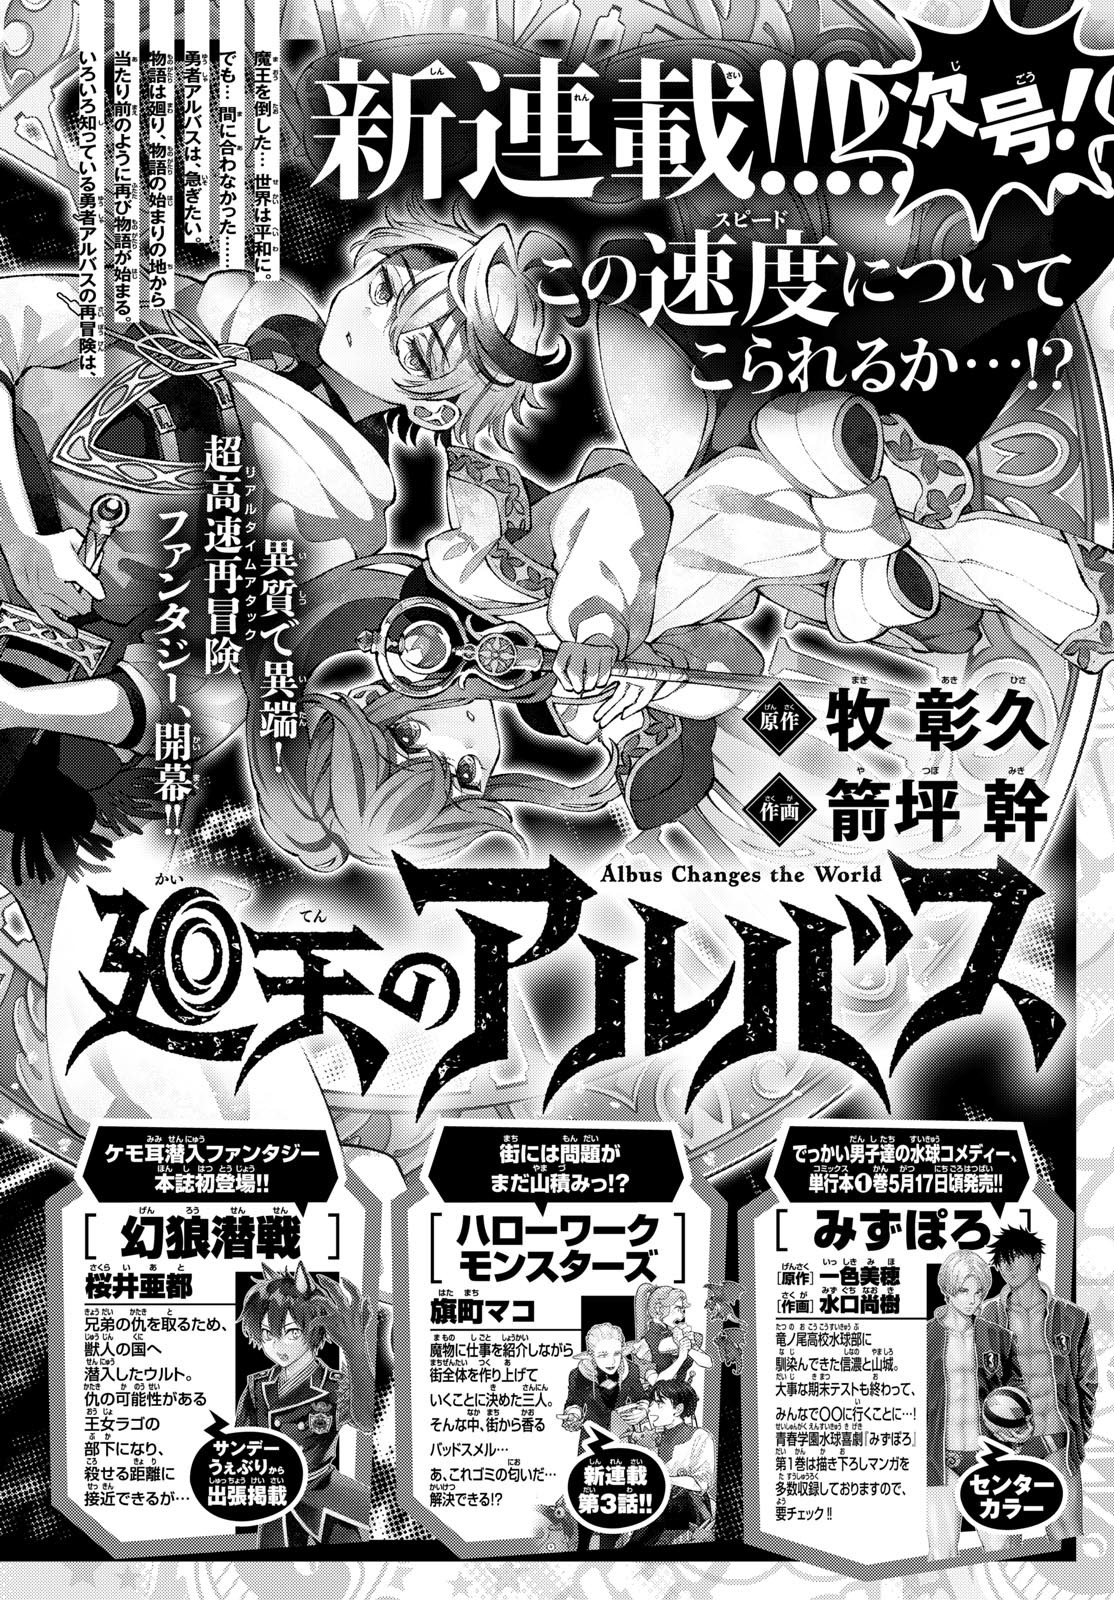 Weekly Shōnen Sunday - 週刊少年サンデー - Chapter 2024-24 - Page 408